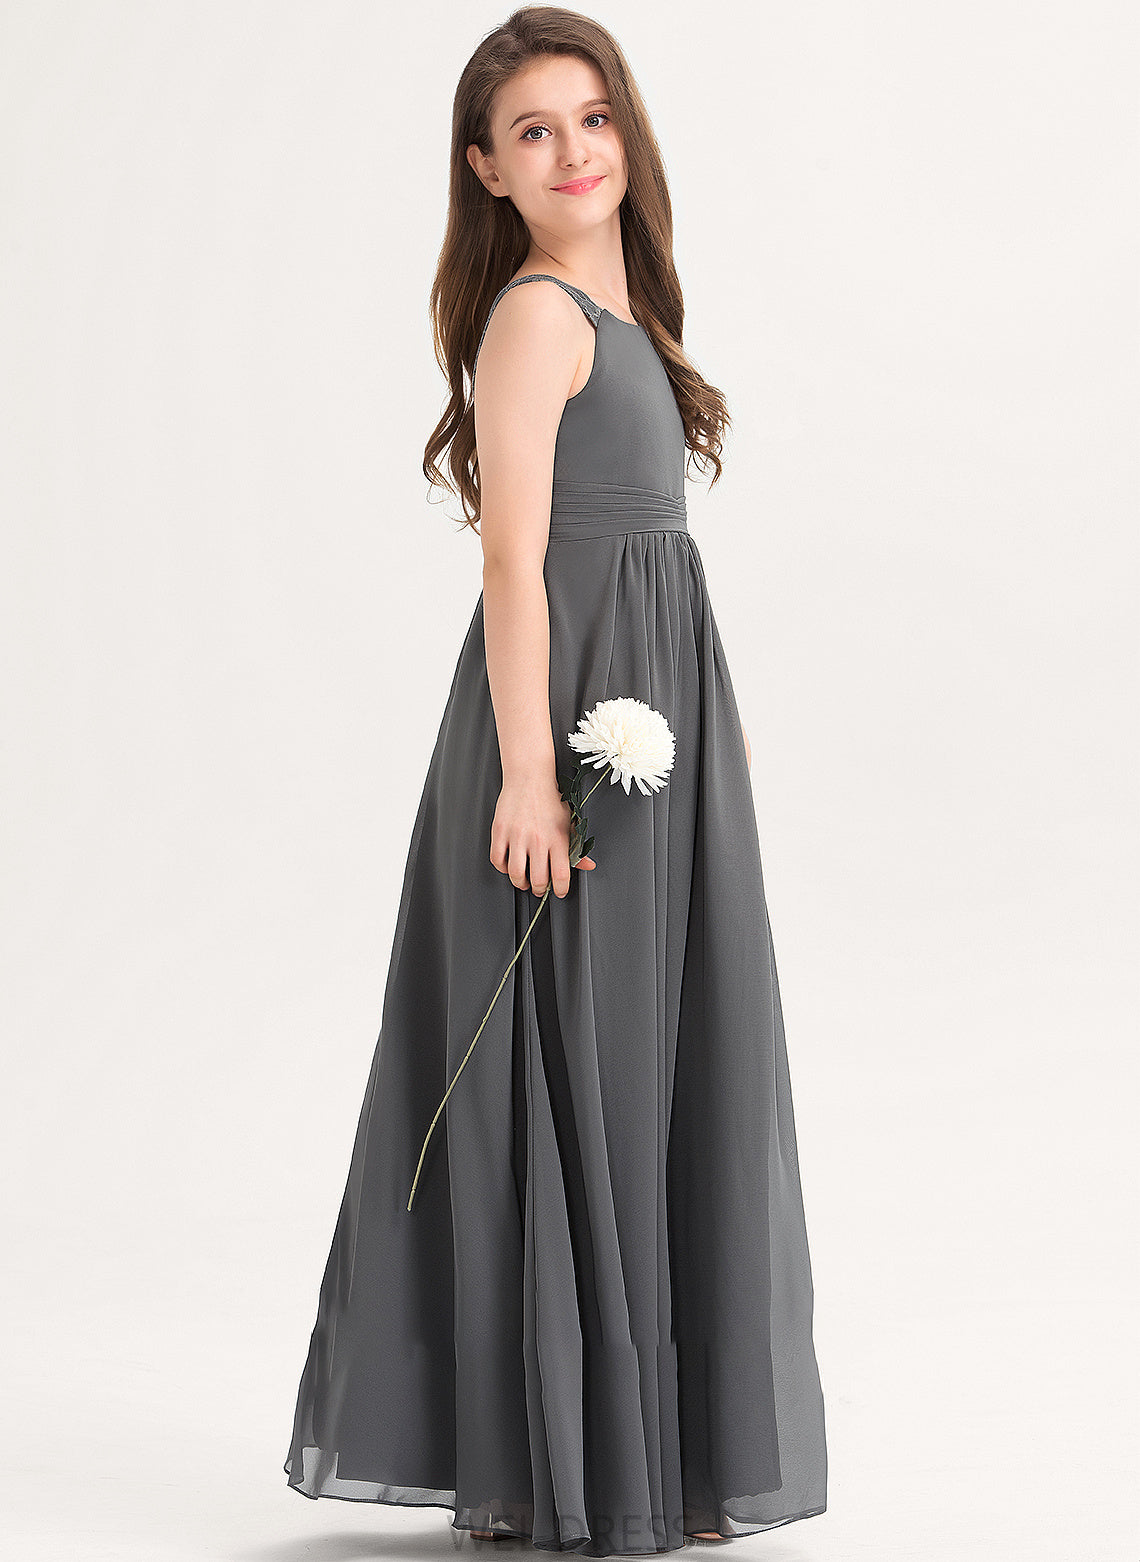 Junior Bridesmaid Dresses Selina Ruffle Floor-Length A-Line Scoop Lace Chiffon Neck With